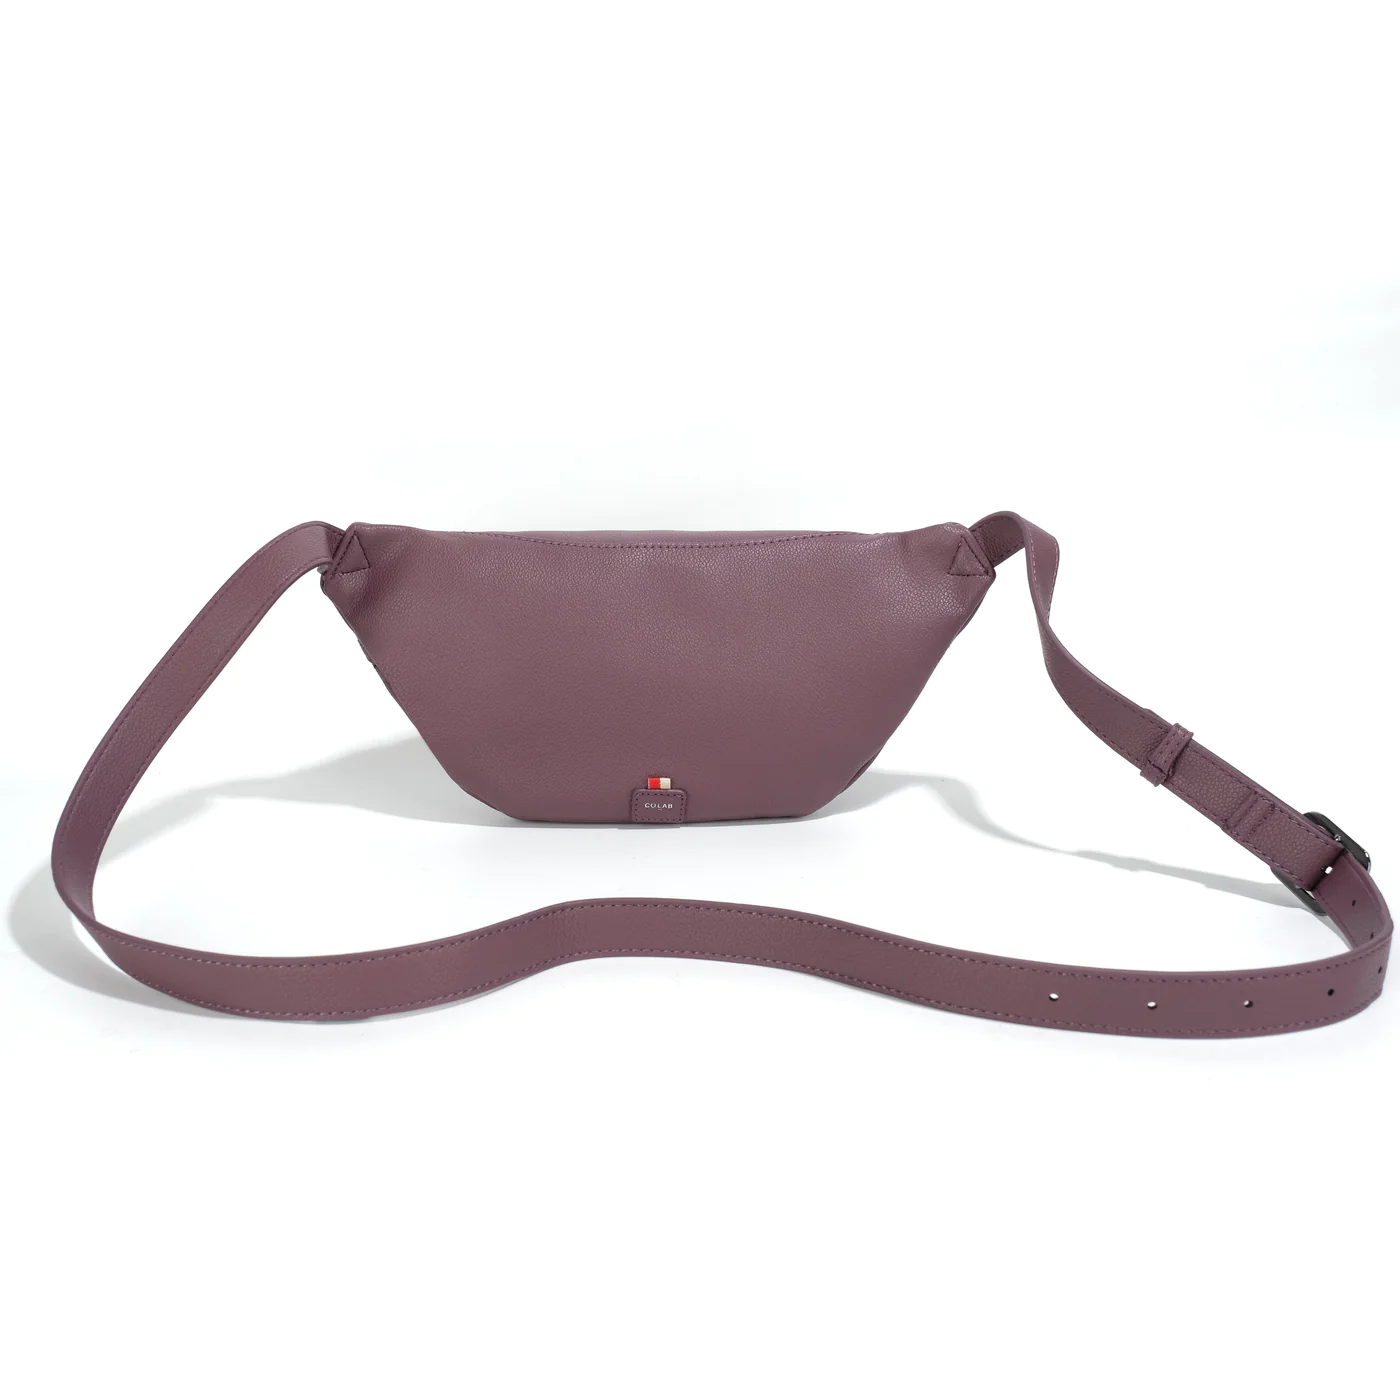 co-lab Ketti Sling - Maven Accessories - Other Accessories - Handbags & Wallets by co-lab | Grace the Boutique